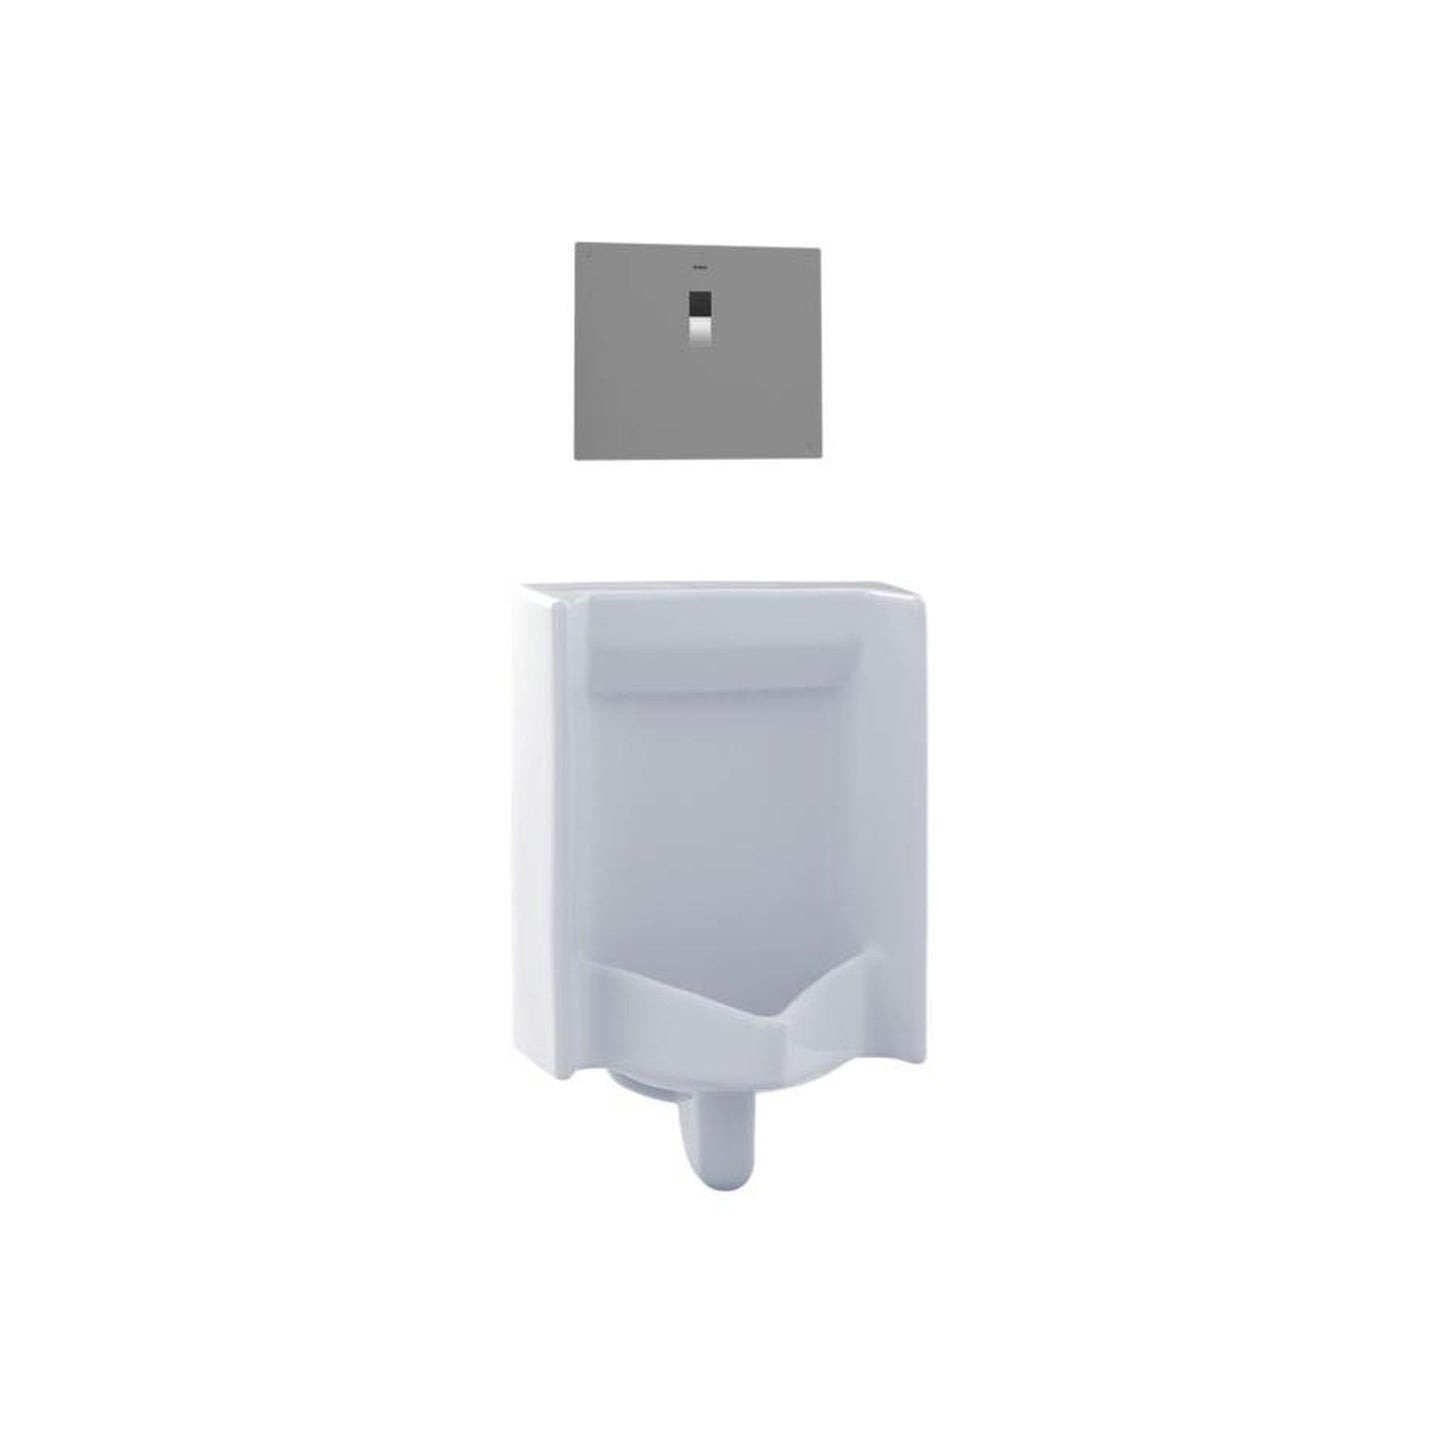 Toto Urinal - Back Spud - 1/8th Gal Cotton